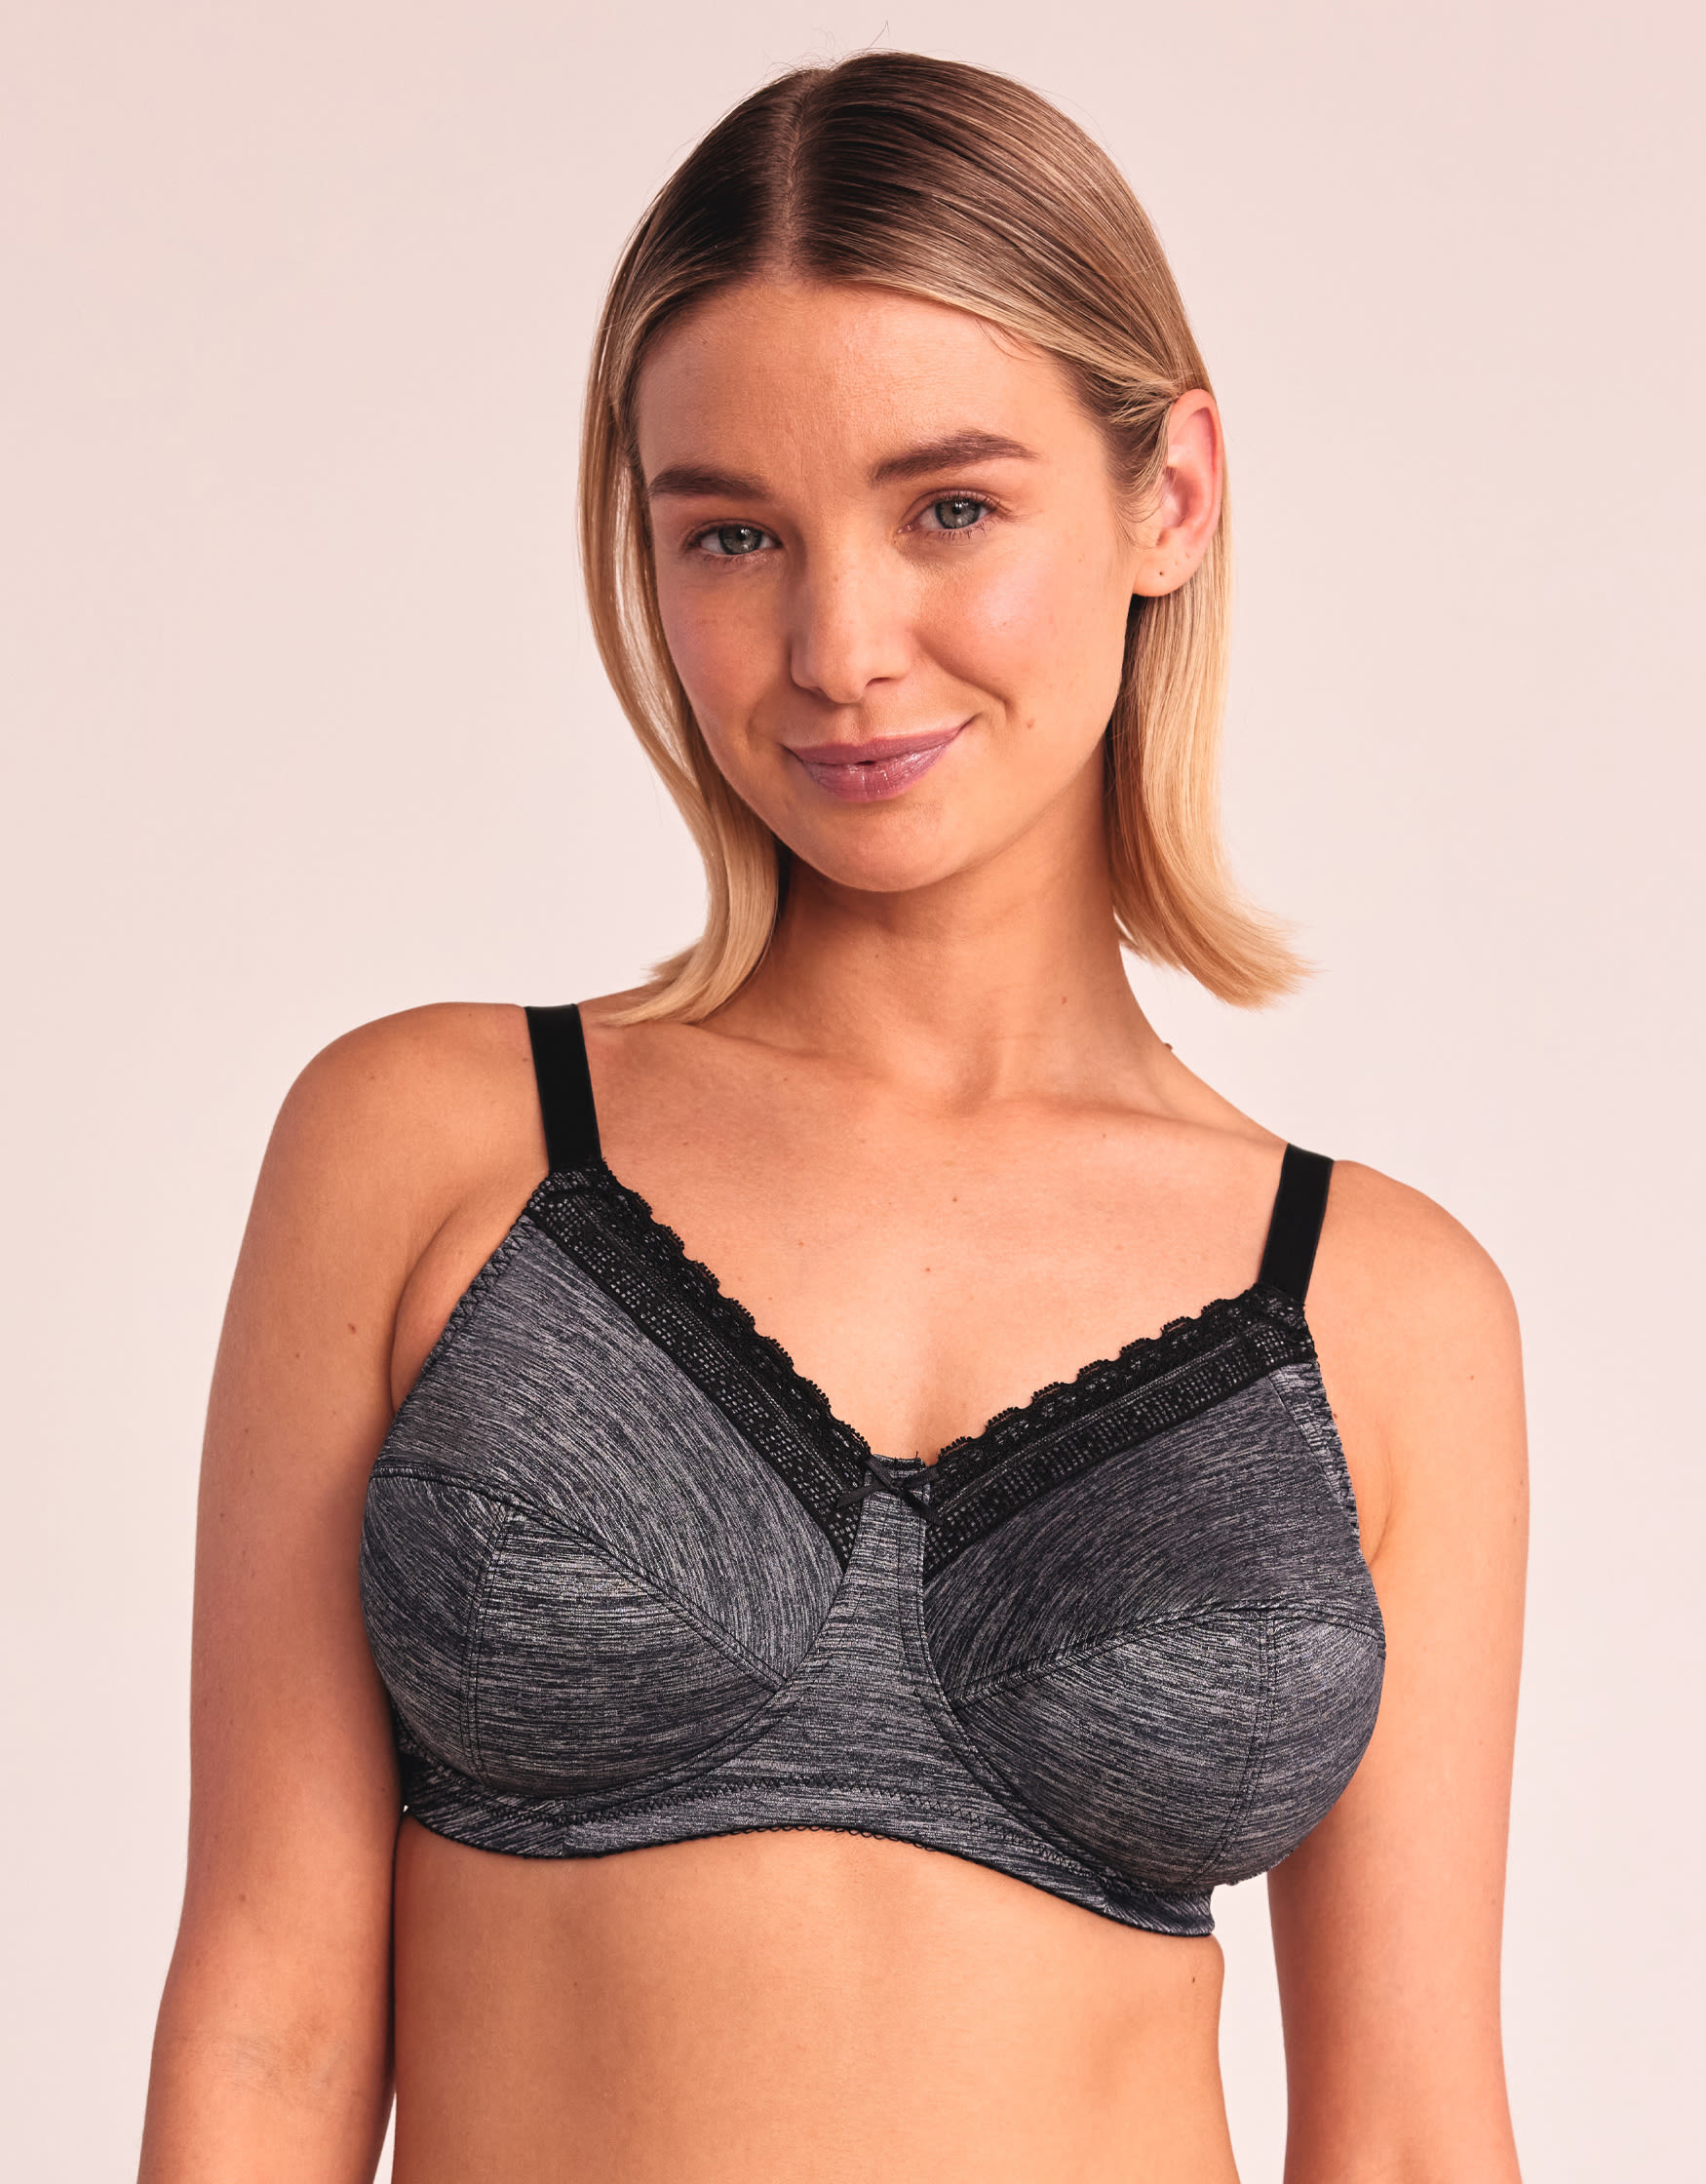 Lace Bras Grey, Bras for Large Breasts